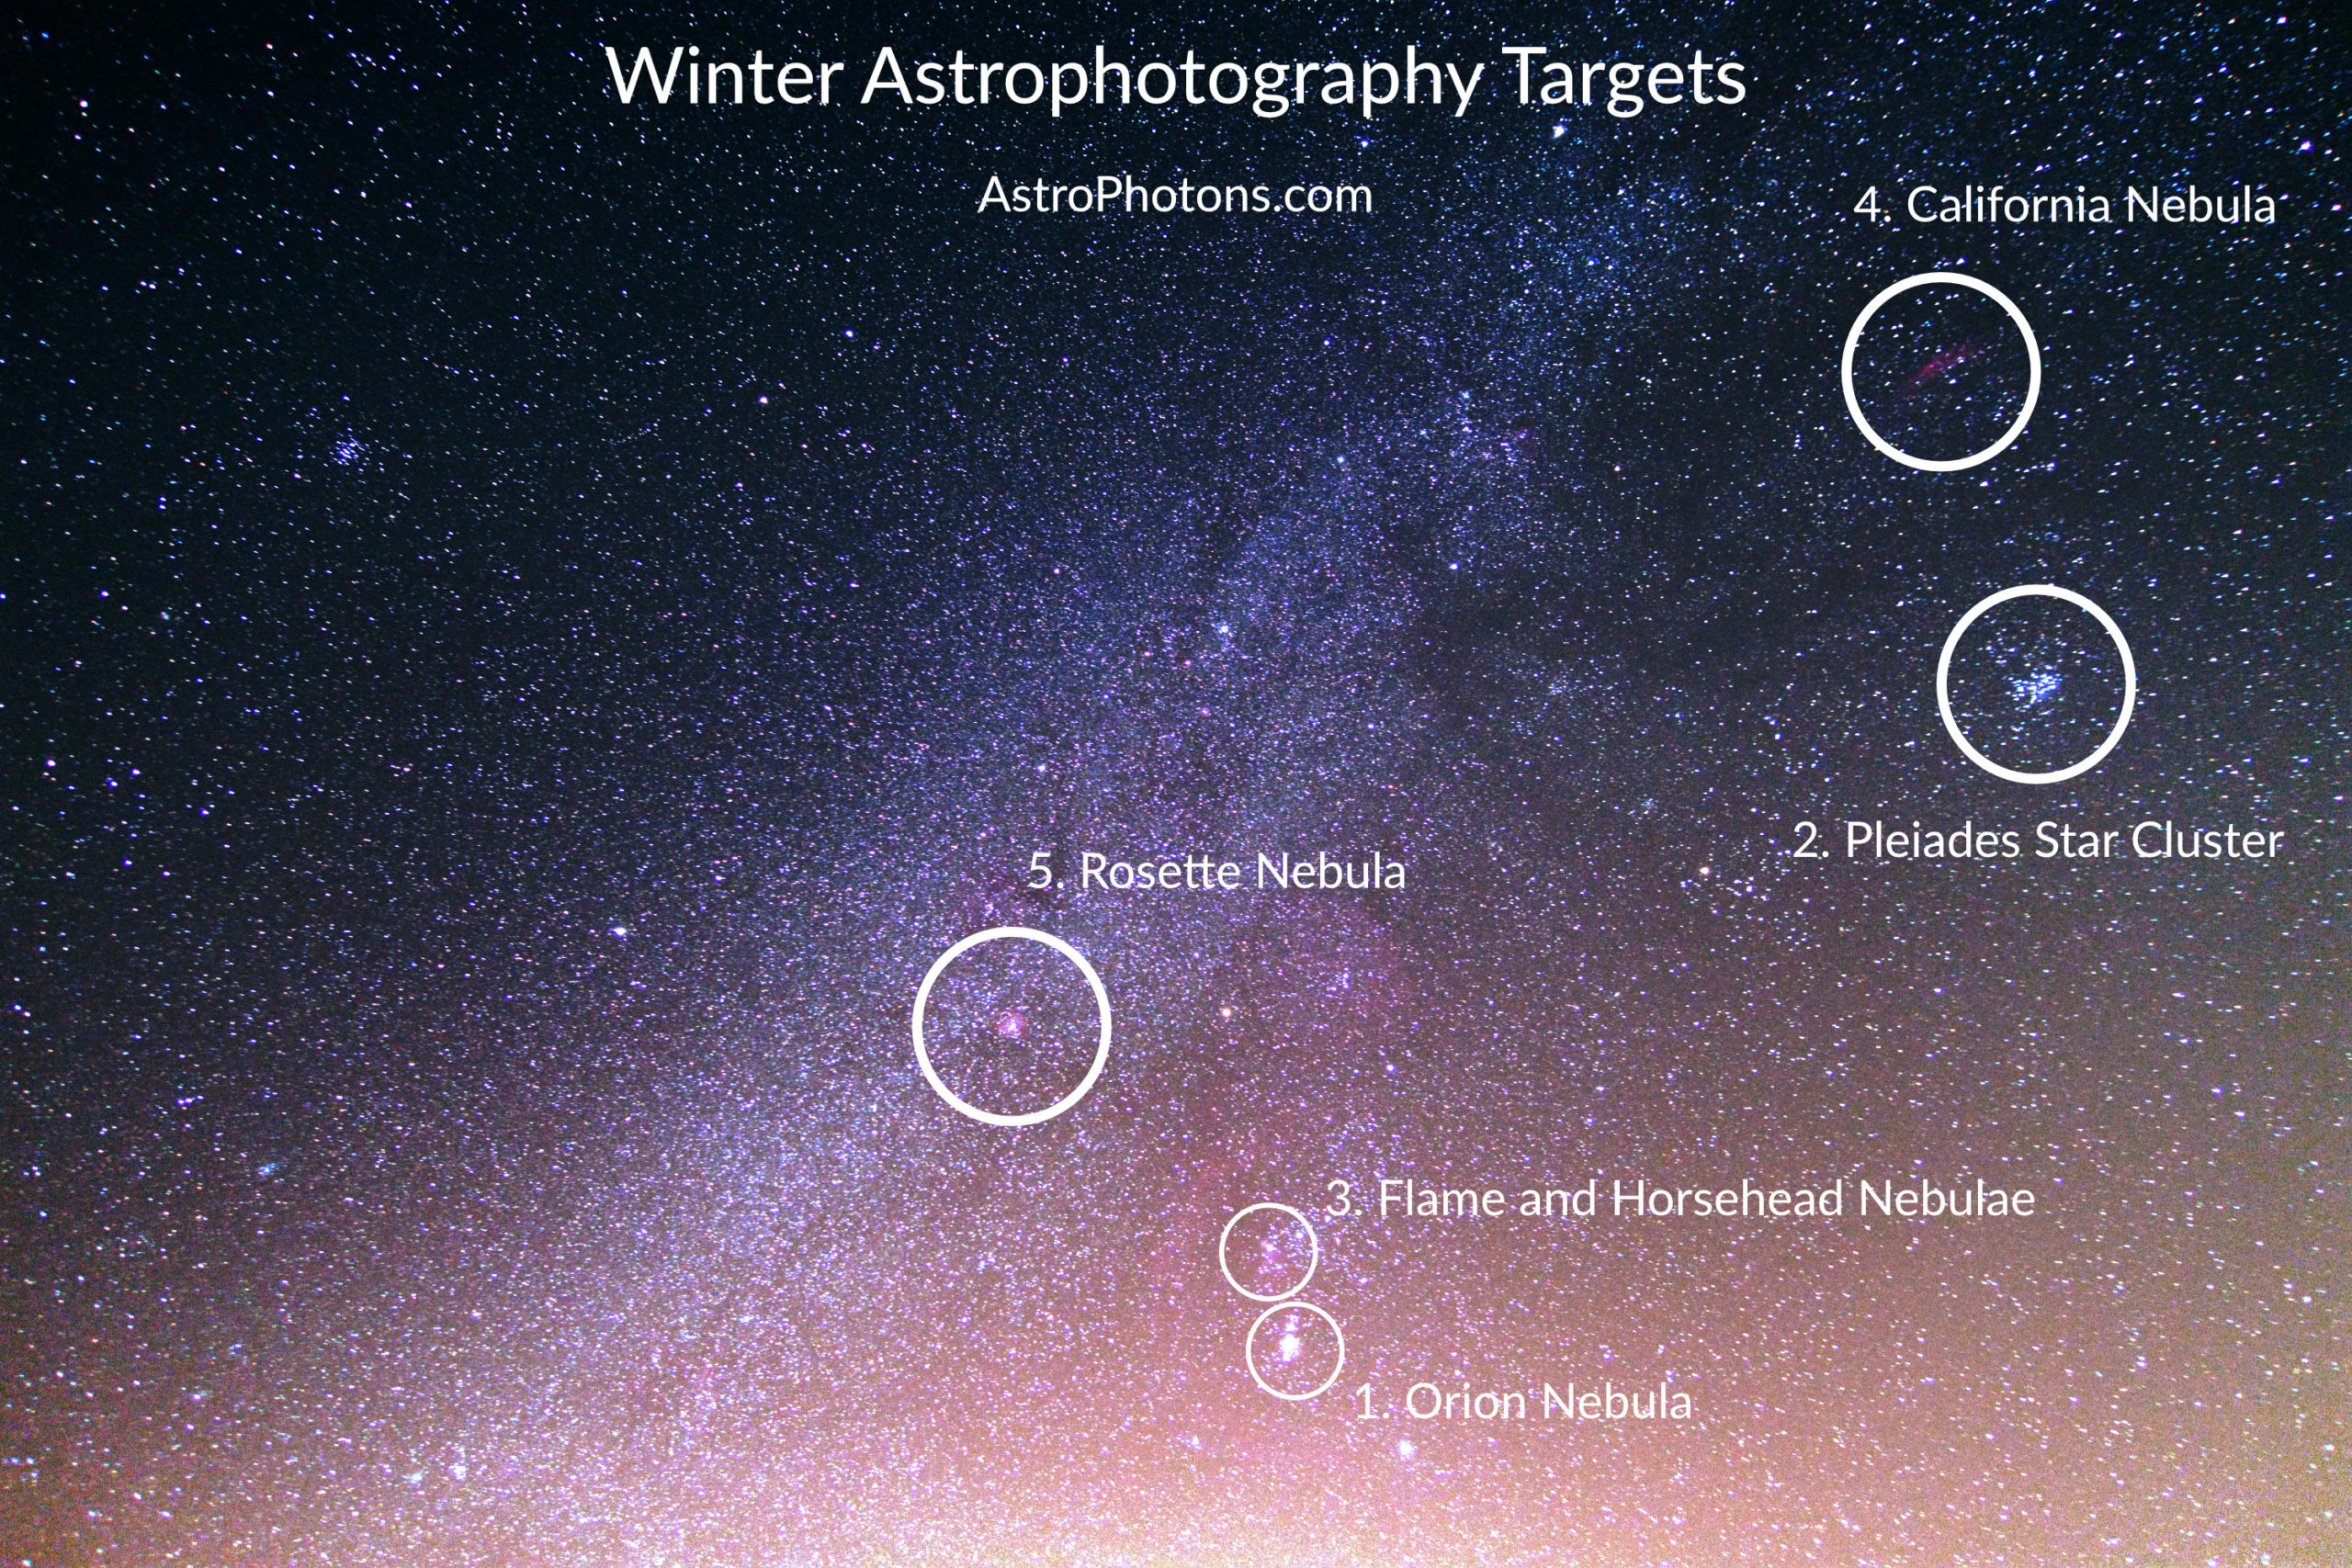 Winter astrophotography targets map